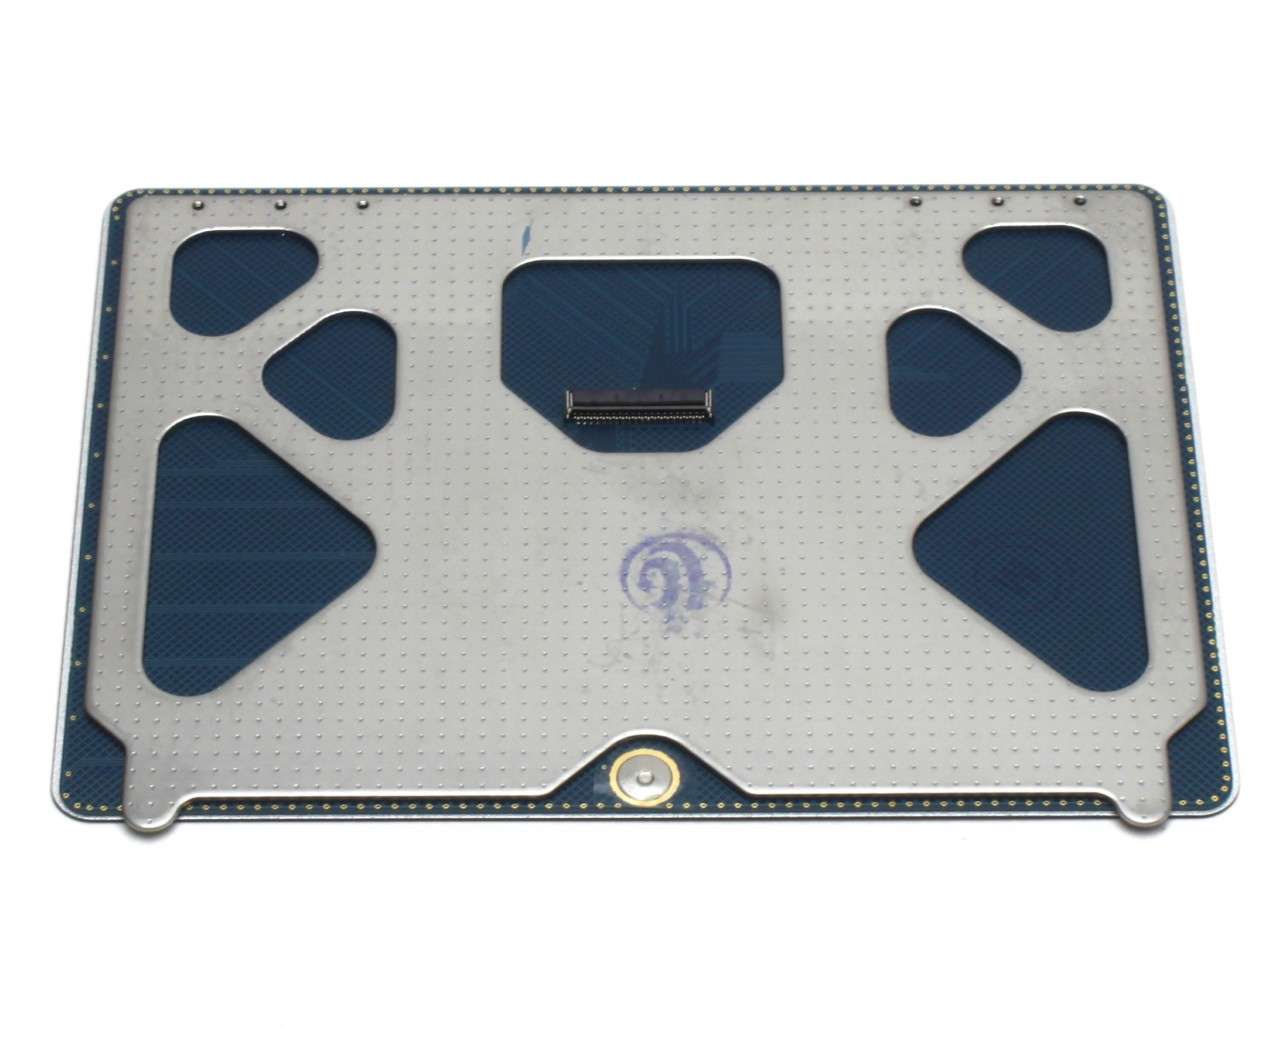 Touchpad Apple Macbook Pro Unibody 13 A1278 Early 2011 Trackpad image